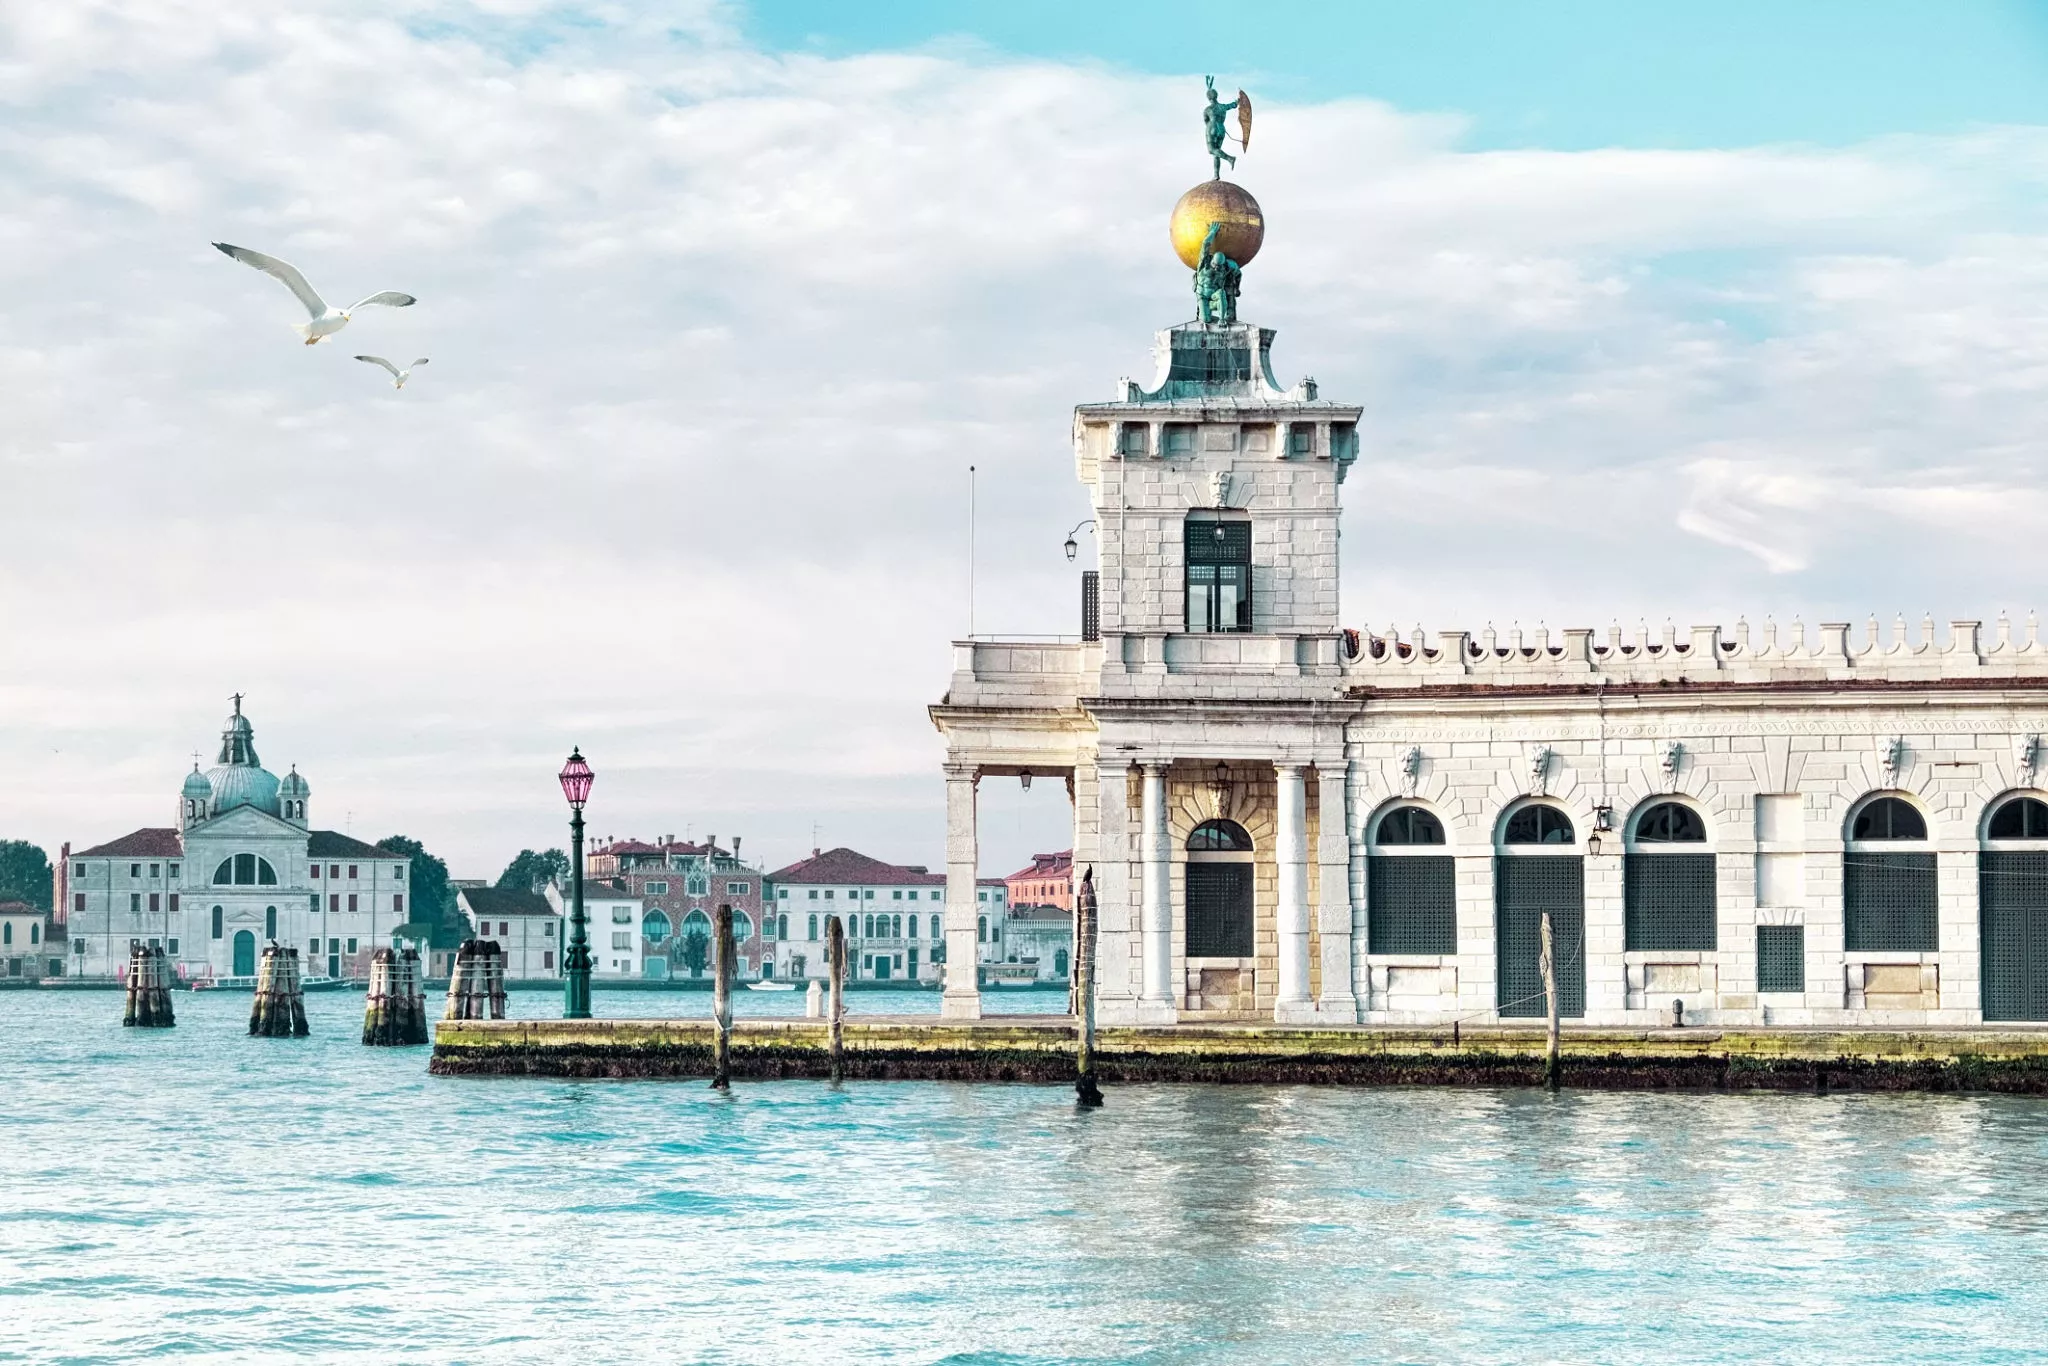 Punta della Dogana in Italy, Europe | Art Galleries - Rated 3.7